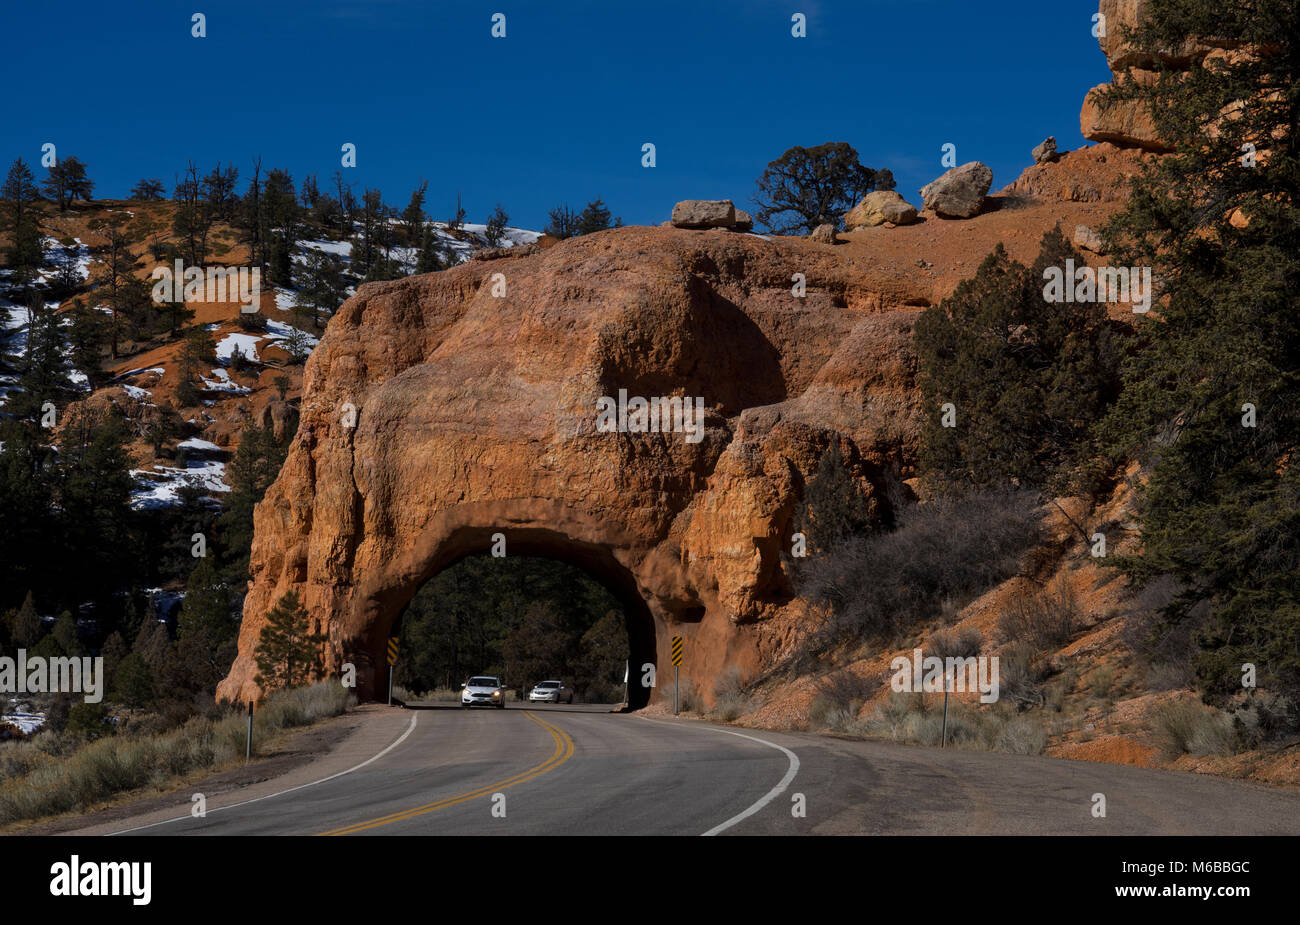 Arch Rock Formation Road tunnel, Red Rock Canyon, Utah, USA Banque D'Images